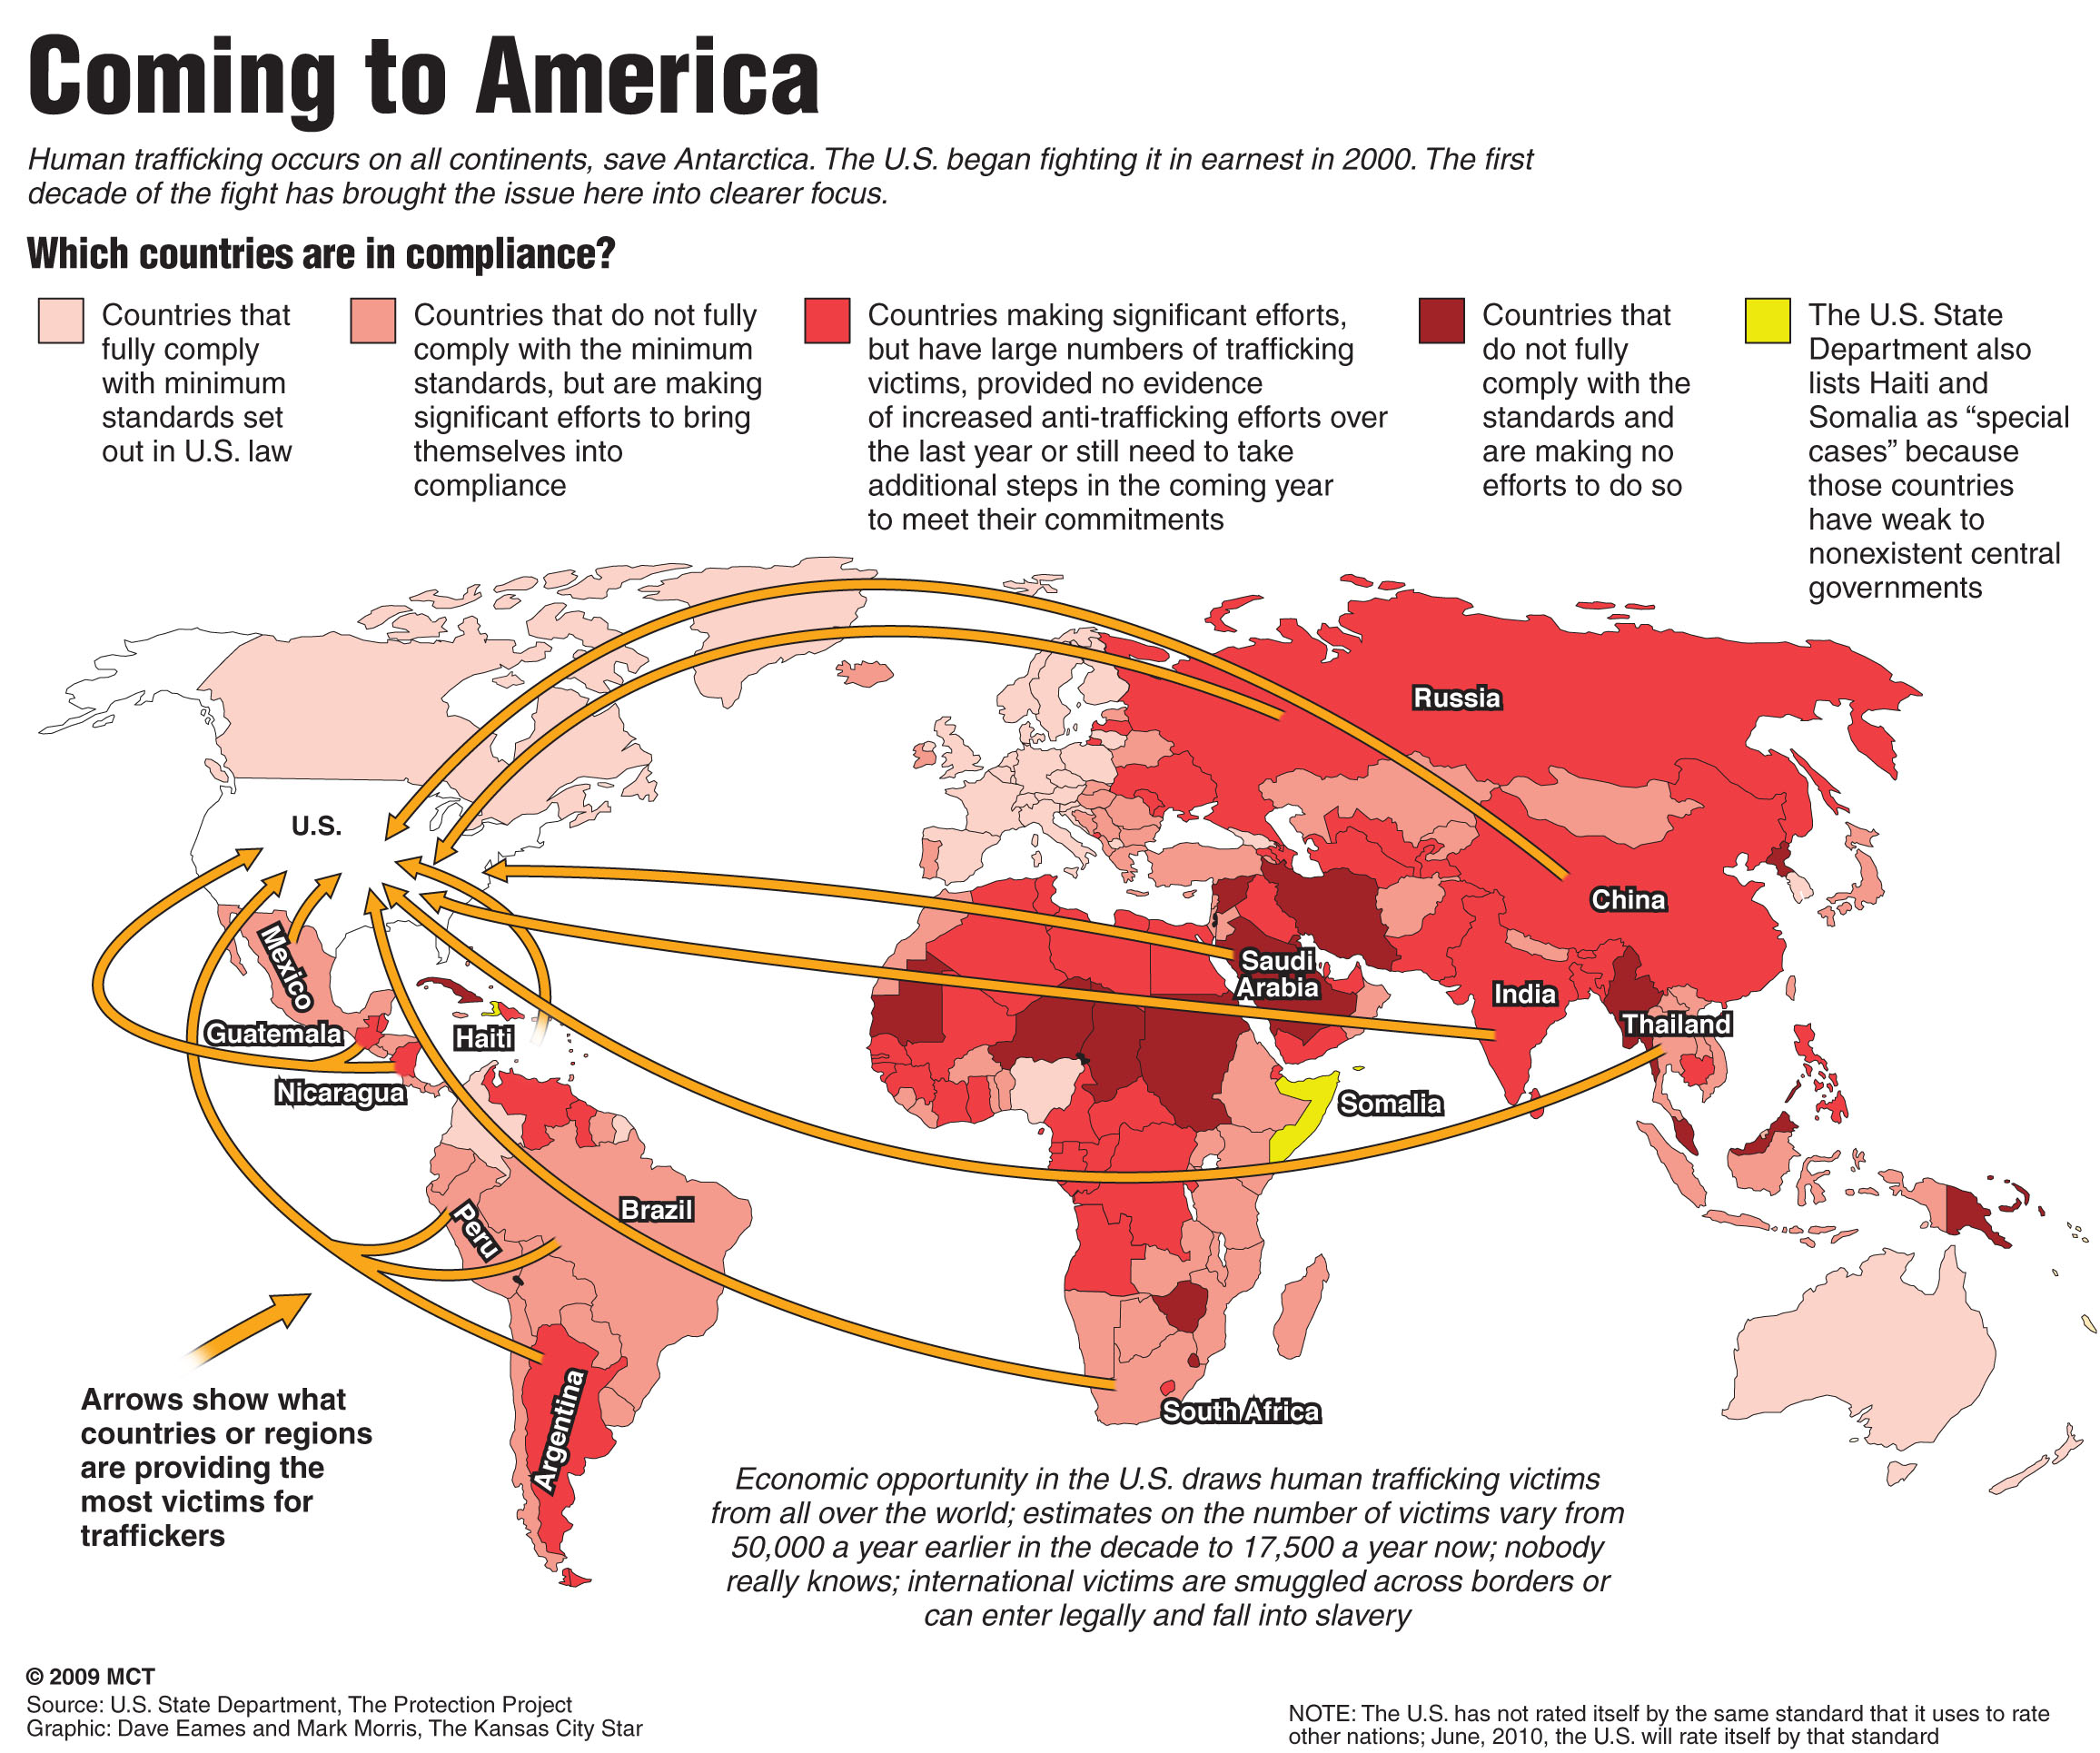 Human trafficking to the U.S., by country